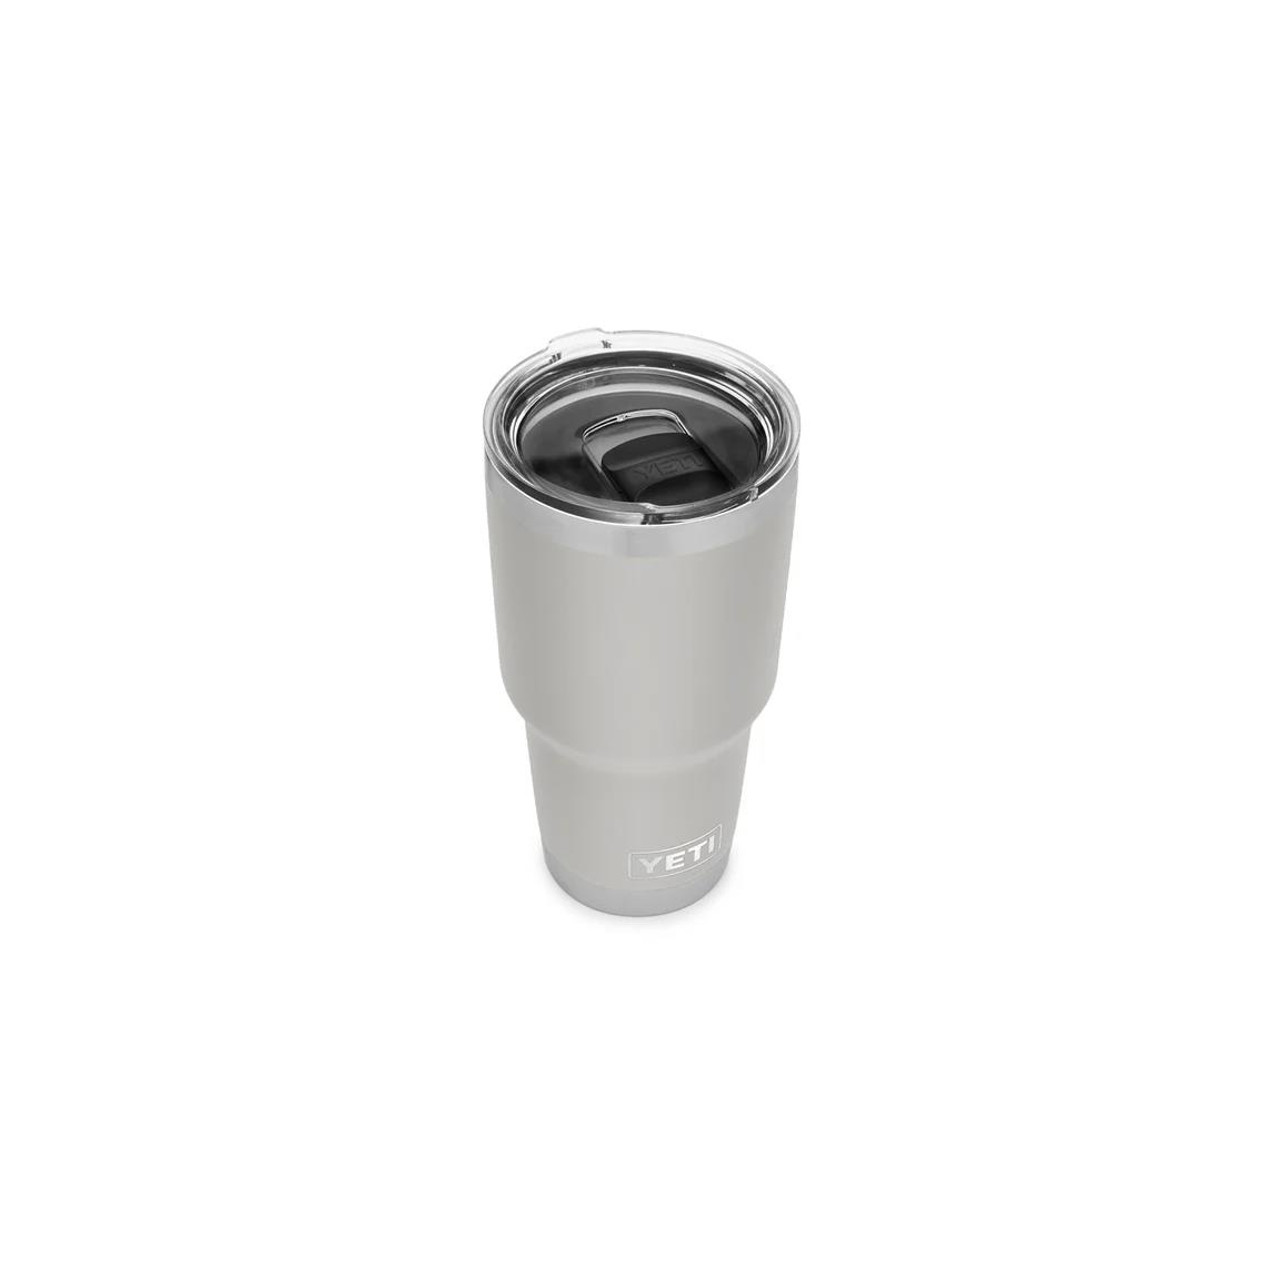 https://cdn11.bigcommerce.com/s-stfpjhht/images/stencil/1280x1280/products/23104/42906/Yeti-Rambler-30-Oz-Tumbler-With-Magslider-Lid-Granite-Gray-21071500466-888830113028_image1__96223.1627330227.jpg?c=2